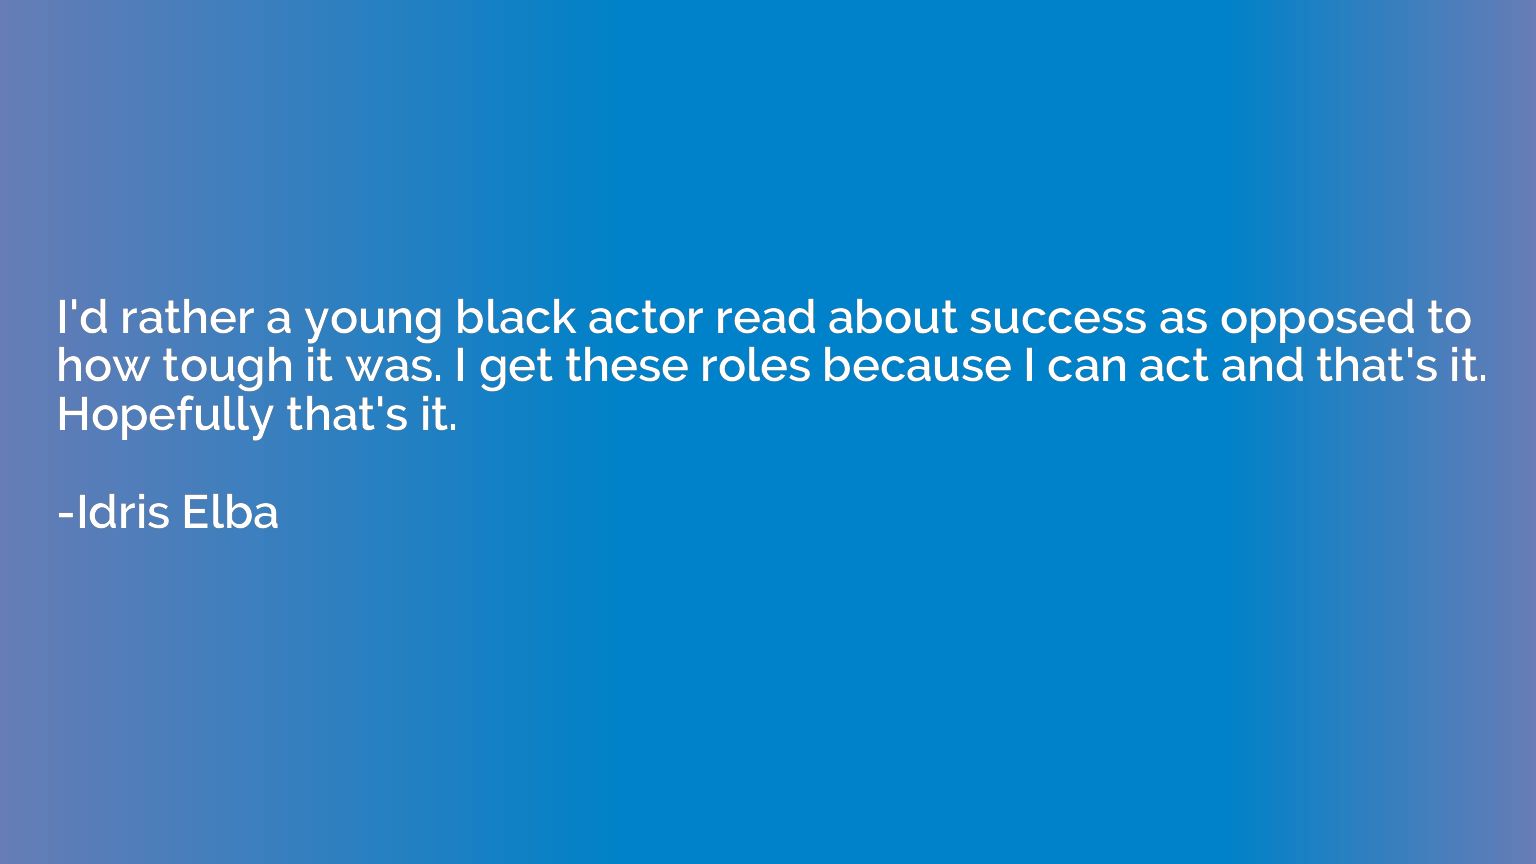 I'd rather a young black actor read about success as opposed